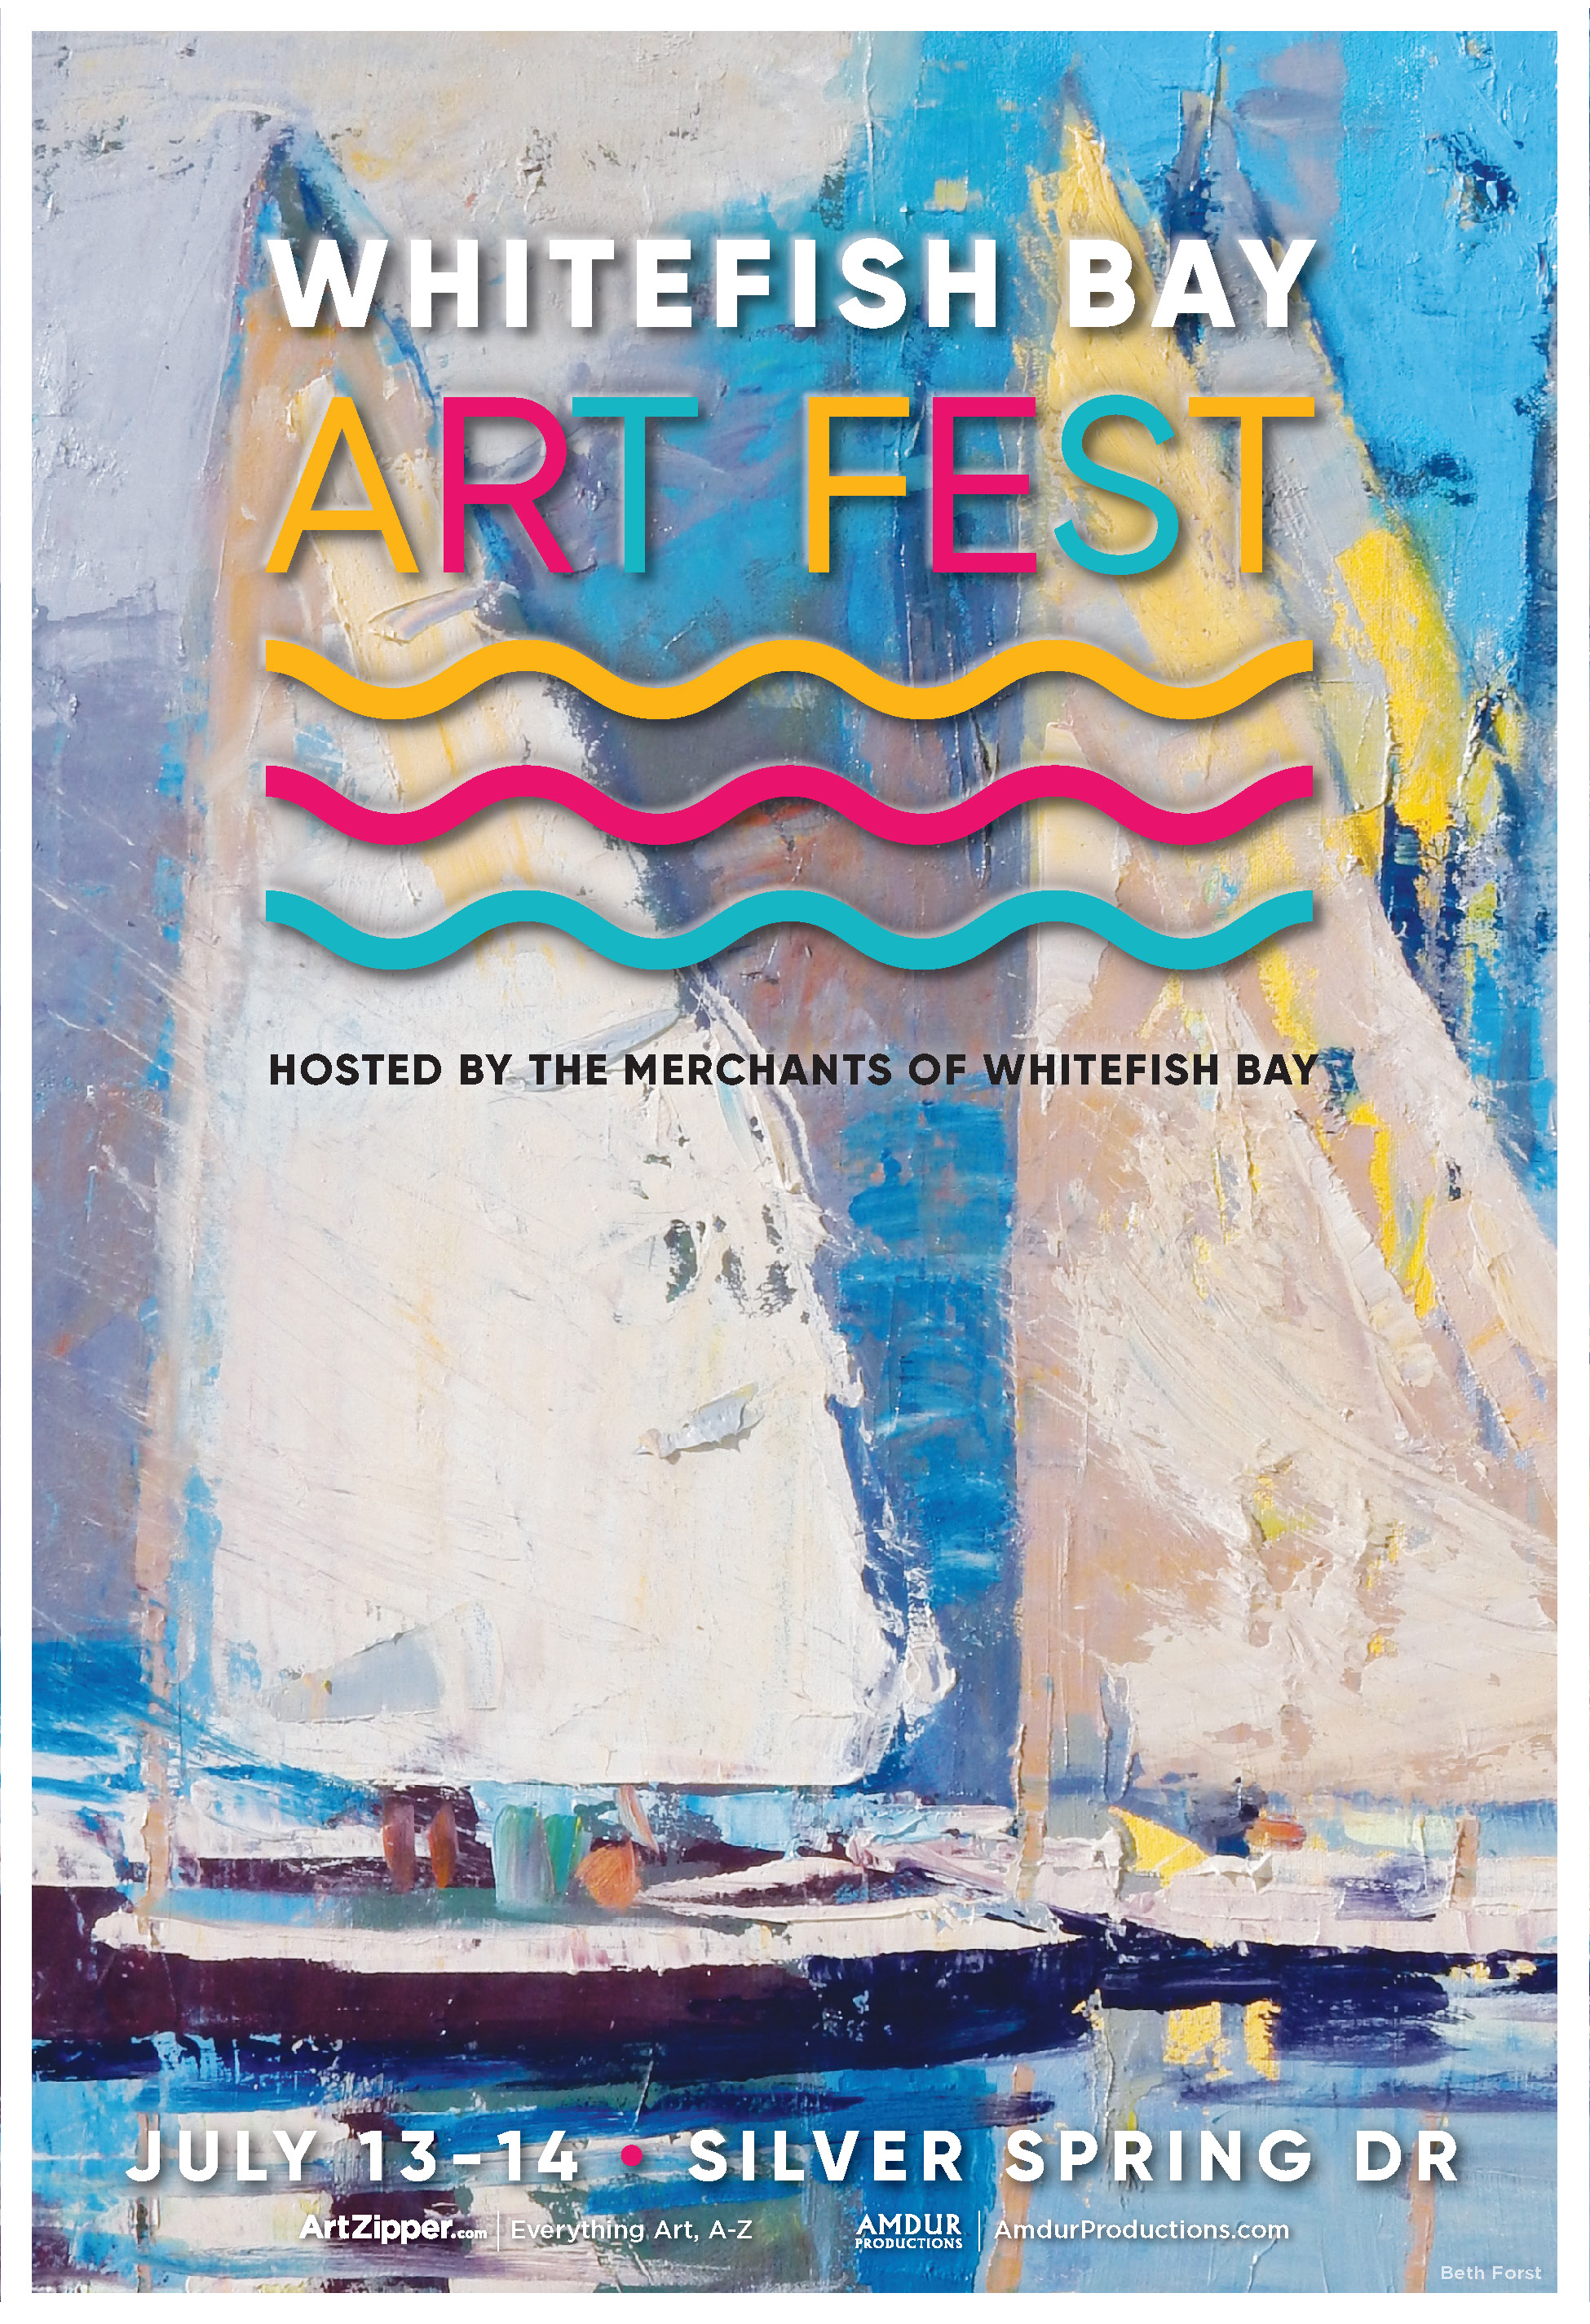 Whitefish Bay Art Fest This Weekend! Amdur Productions